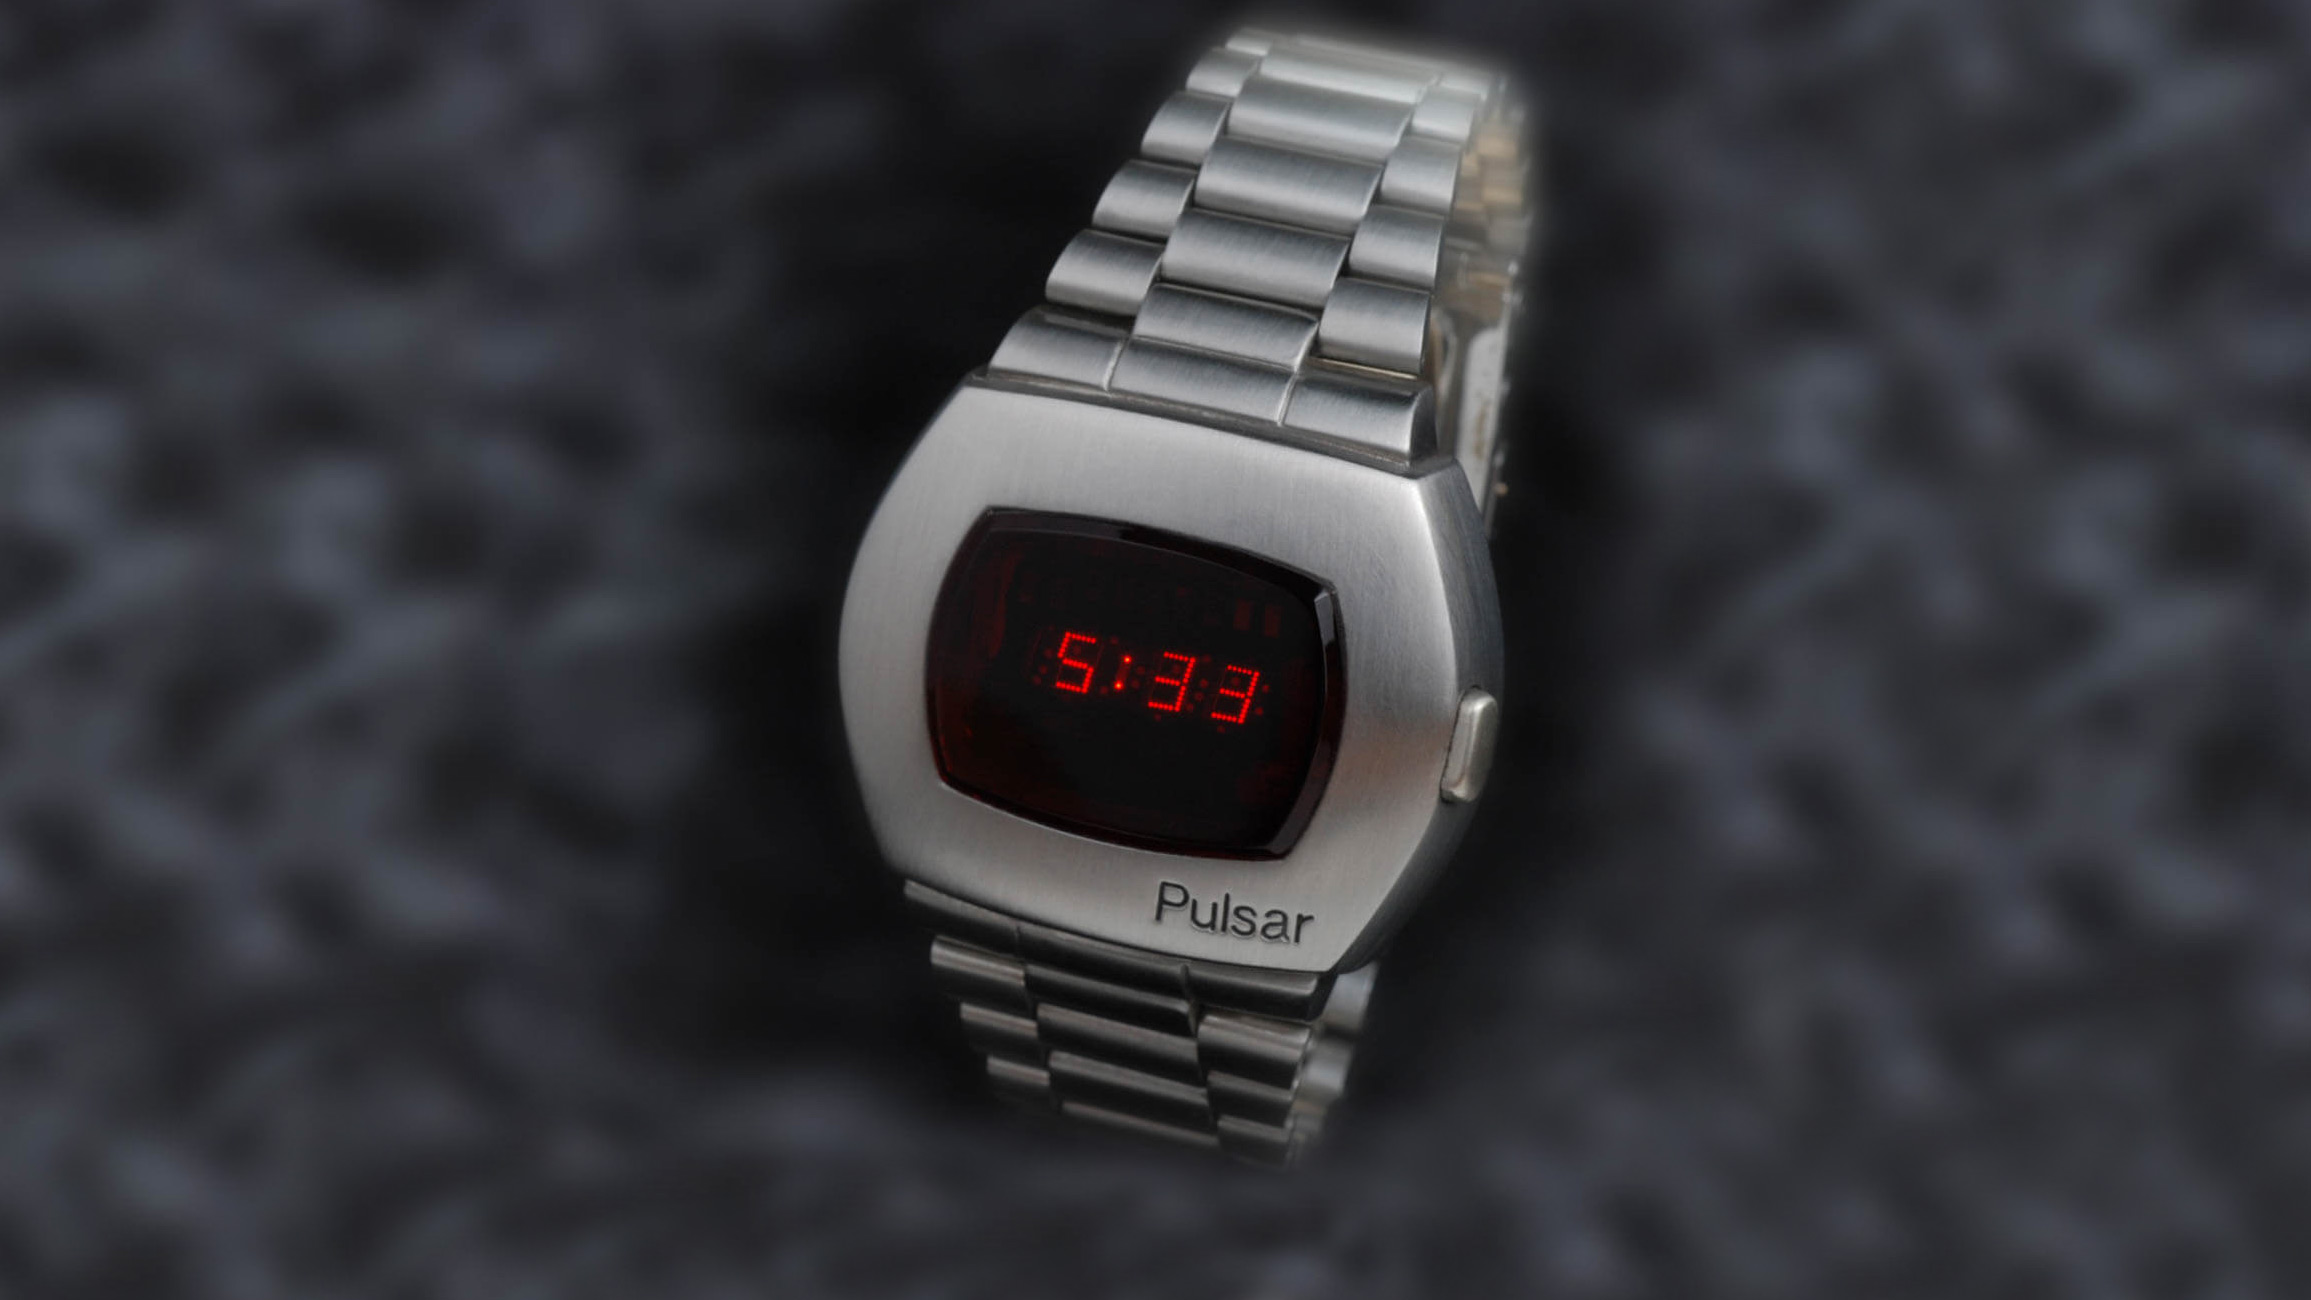 cool lcd watches